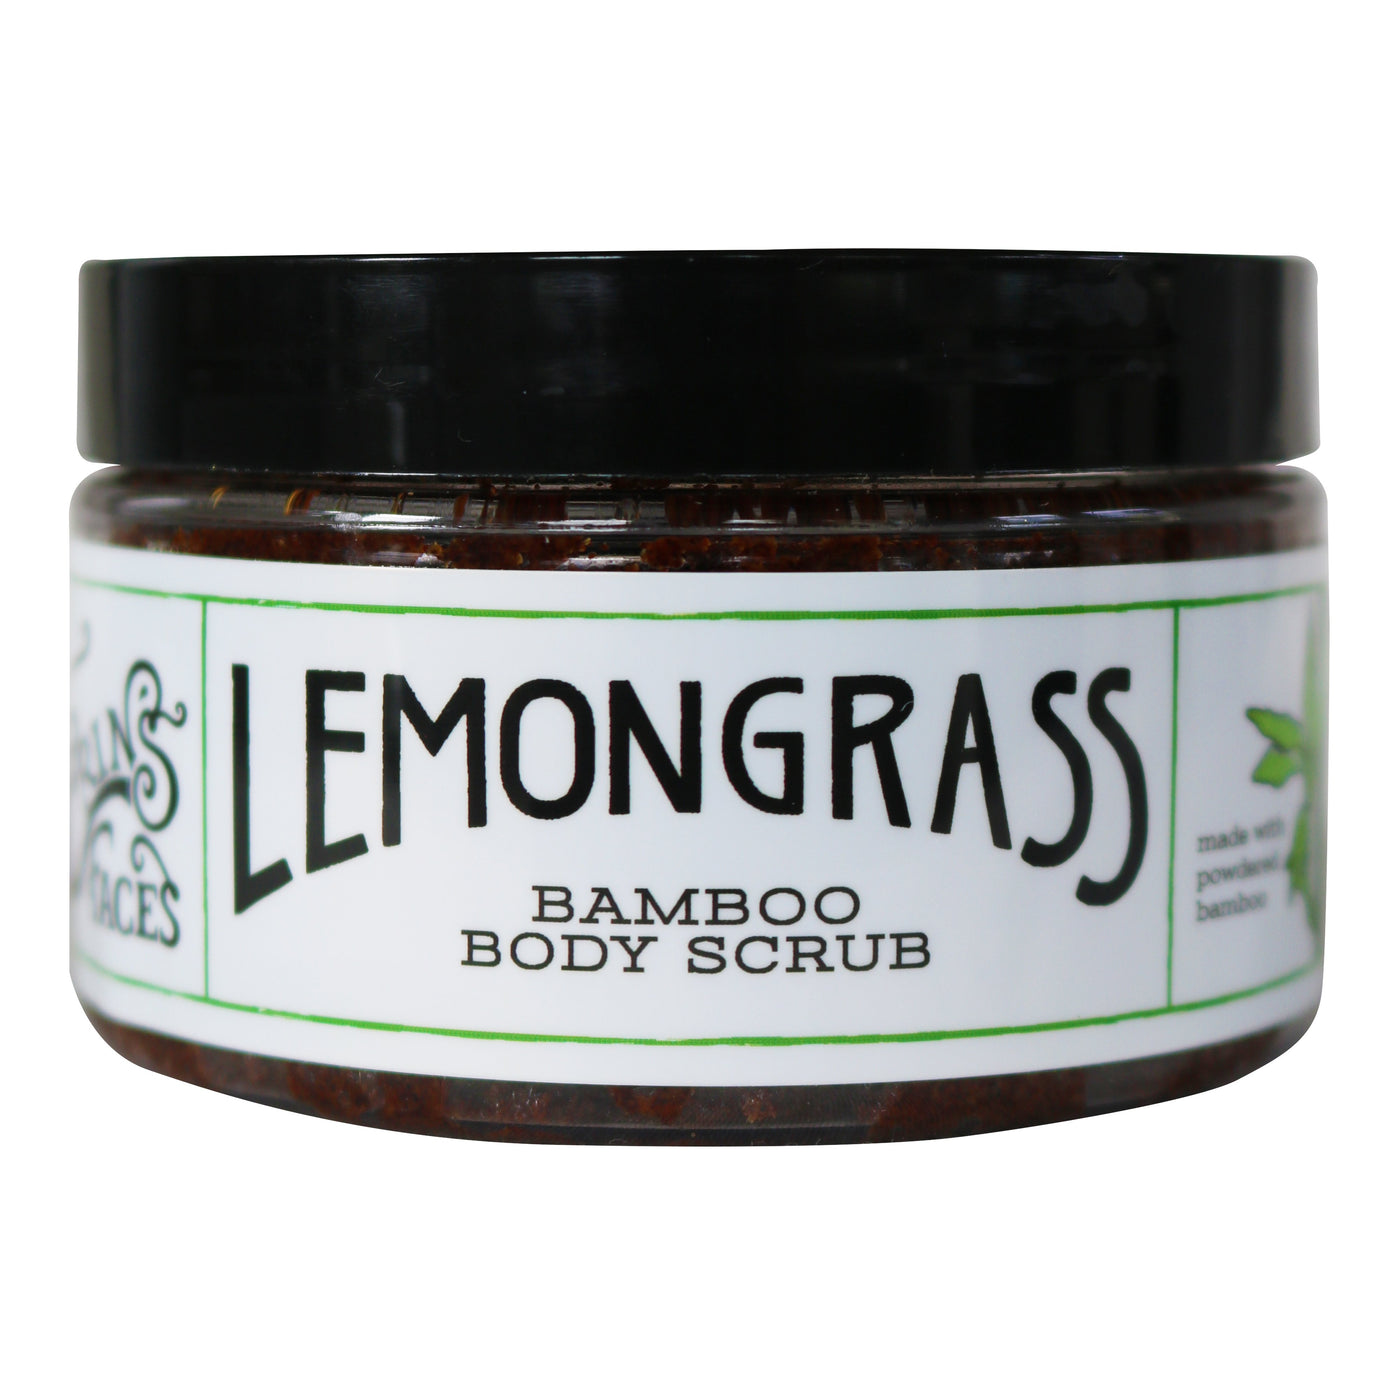 revitalizing body scrub in the scent lemongrass inside a 4oz closed container